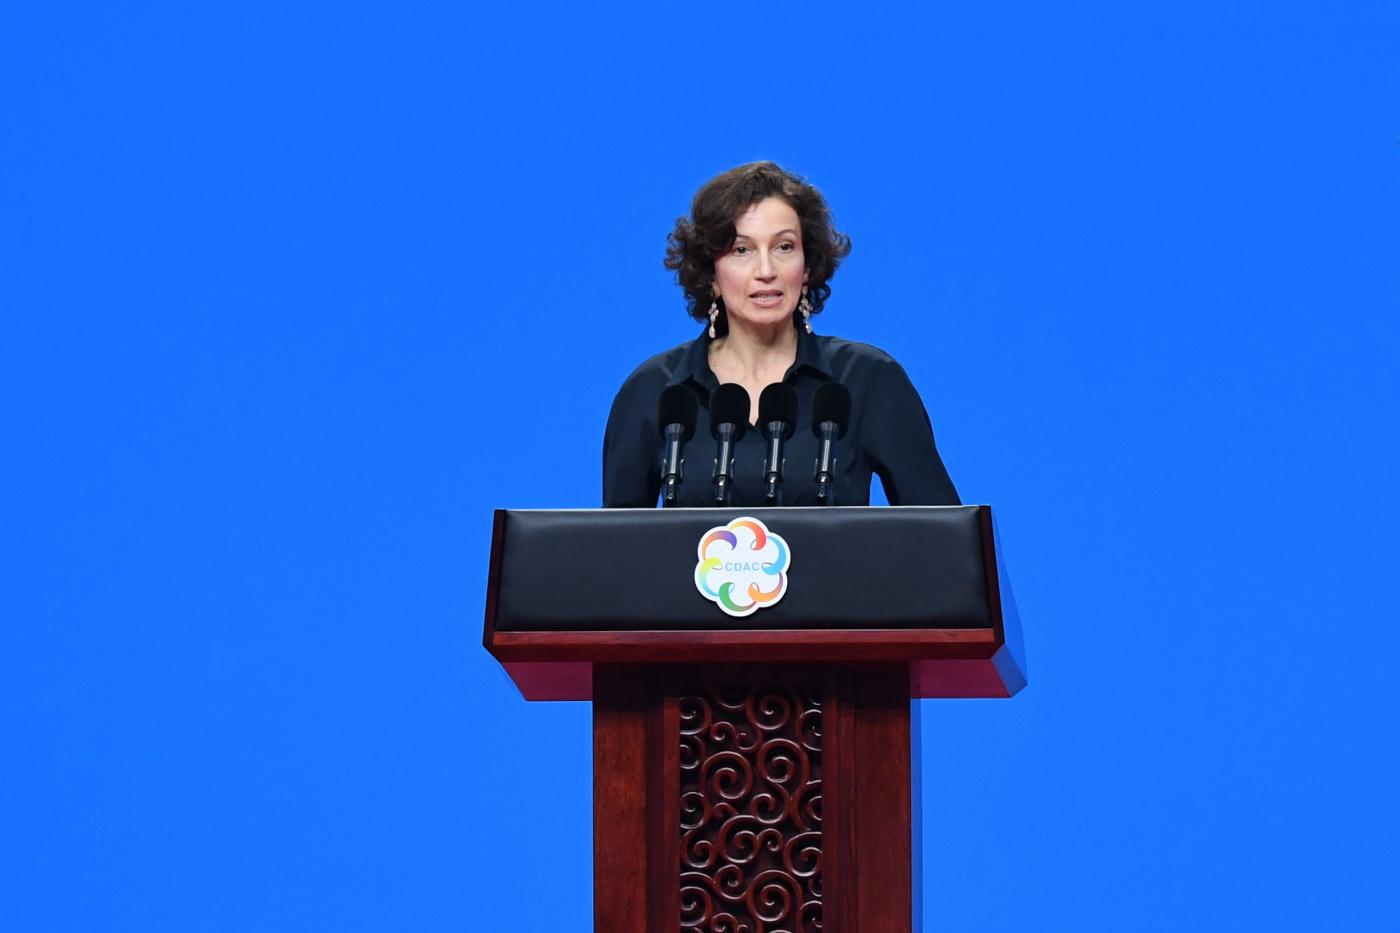 BEIJING, May 15, 2019 (Xinhua) -- UNESCO Director-General Audrey Azoulay delivers a speech at the opening ceremony of the Conference on Dialogue of Asian Civilizations (150519) at the China National Convention Center in Beijing, capital of China, May 15, 2019. (Xinhua/Ju Huanzong/IANS) by .